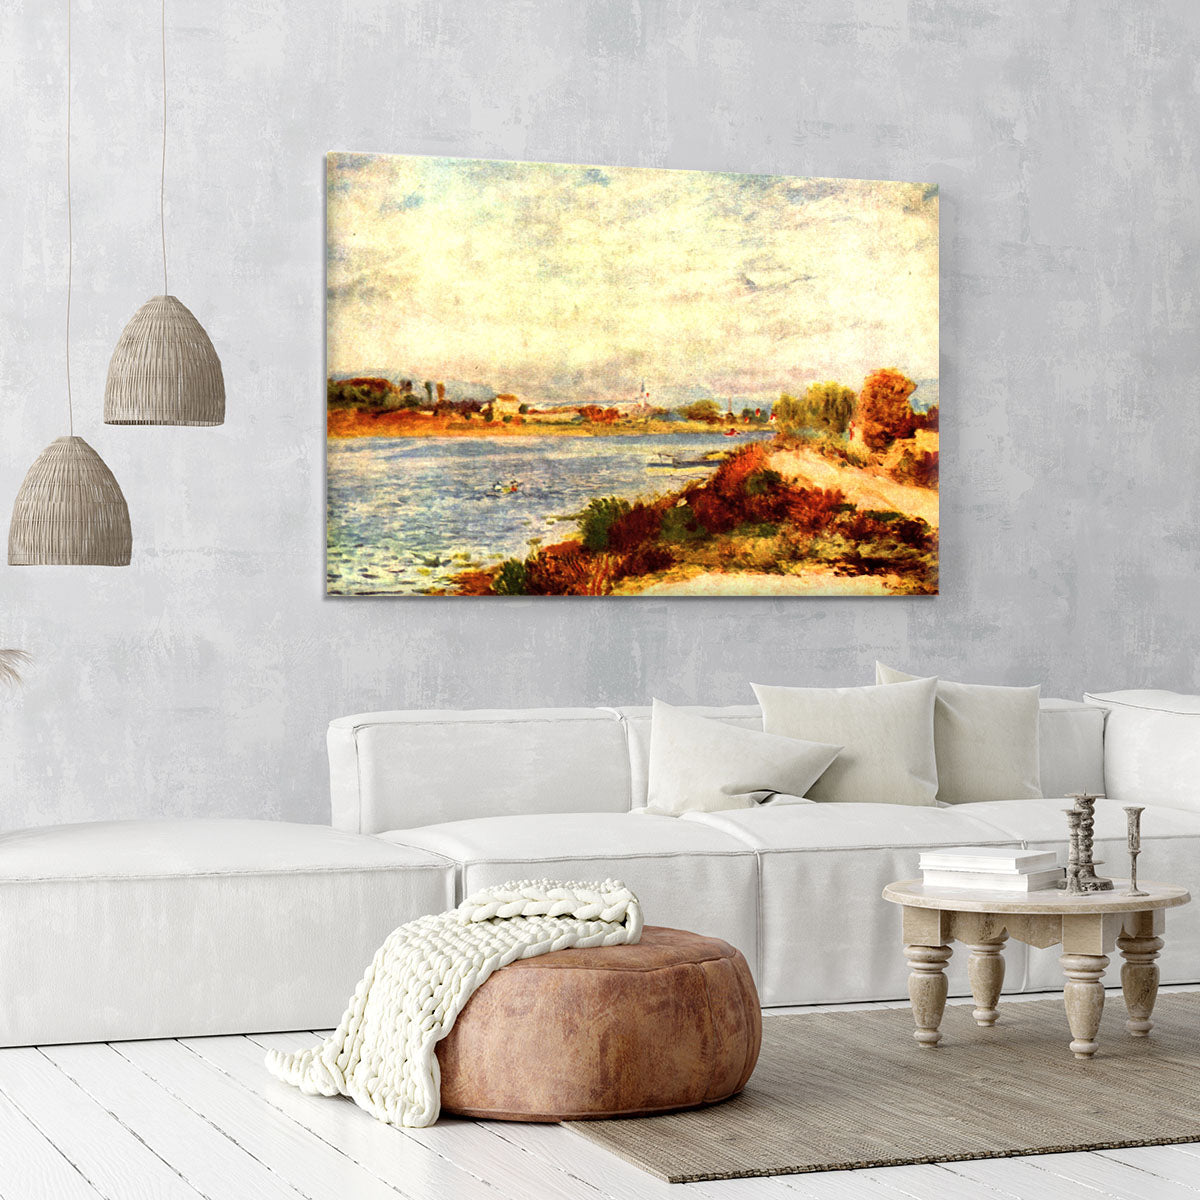 Seine in Argenteuil by Renoir Canvas Print or Poster - Canvas Art Rocks - 6